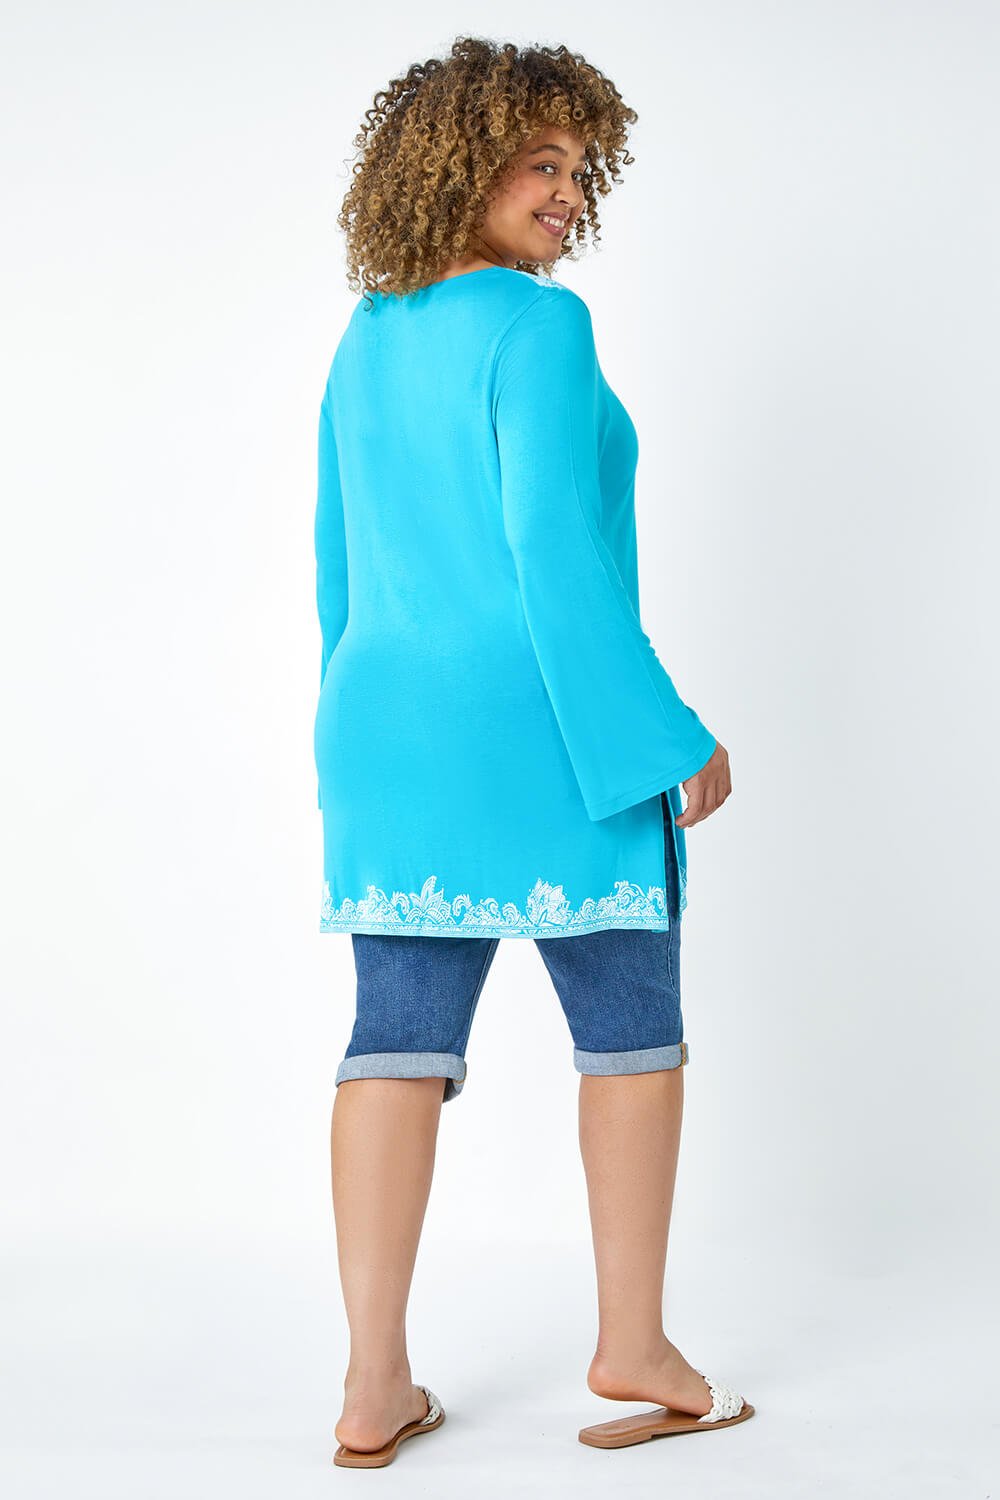 Turquoise Curve Border Print Lace Up Top, Image 3 of 5